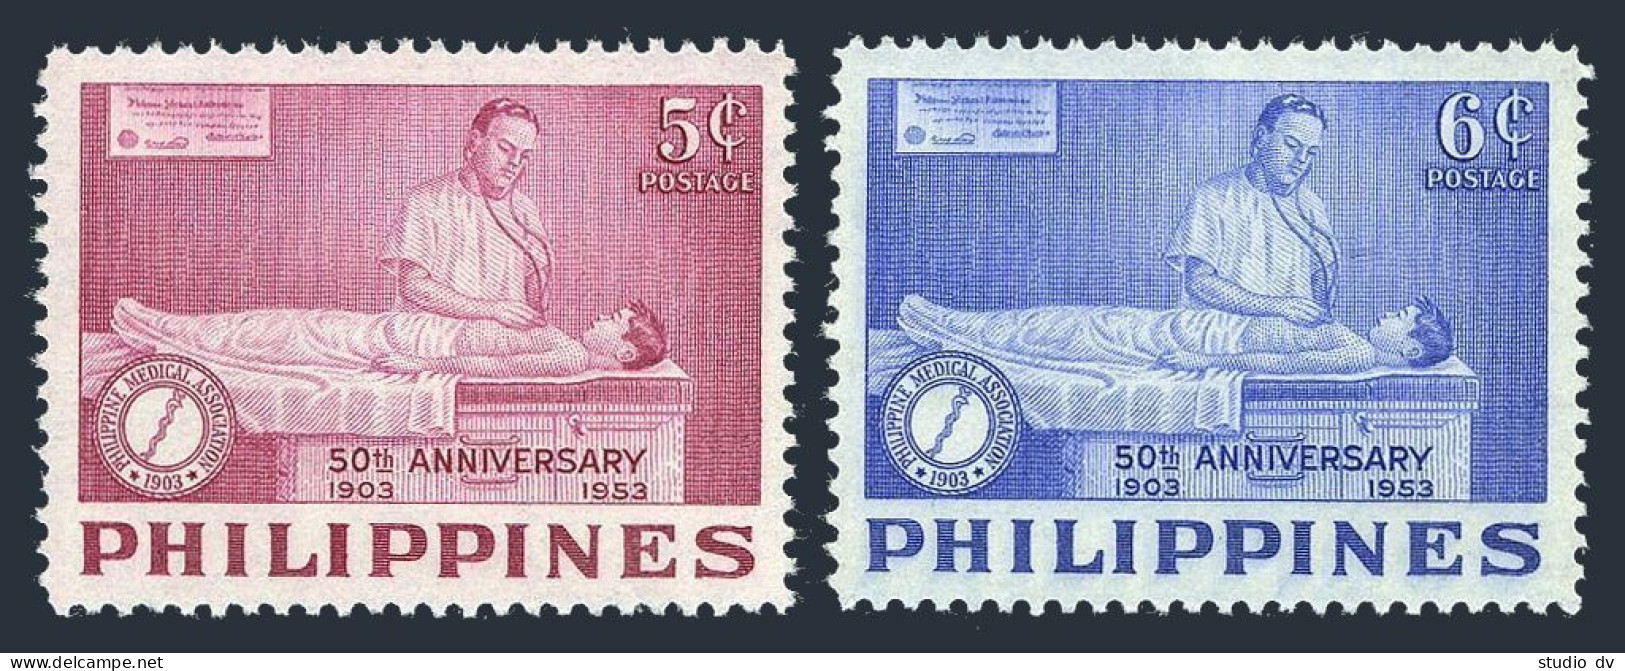 Philippines 603-604, MNH. Michel 571-572. Medical Assoc. 50th Ann. 1953. Doctor. - Philippinen